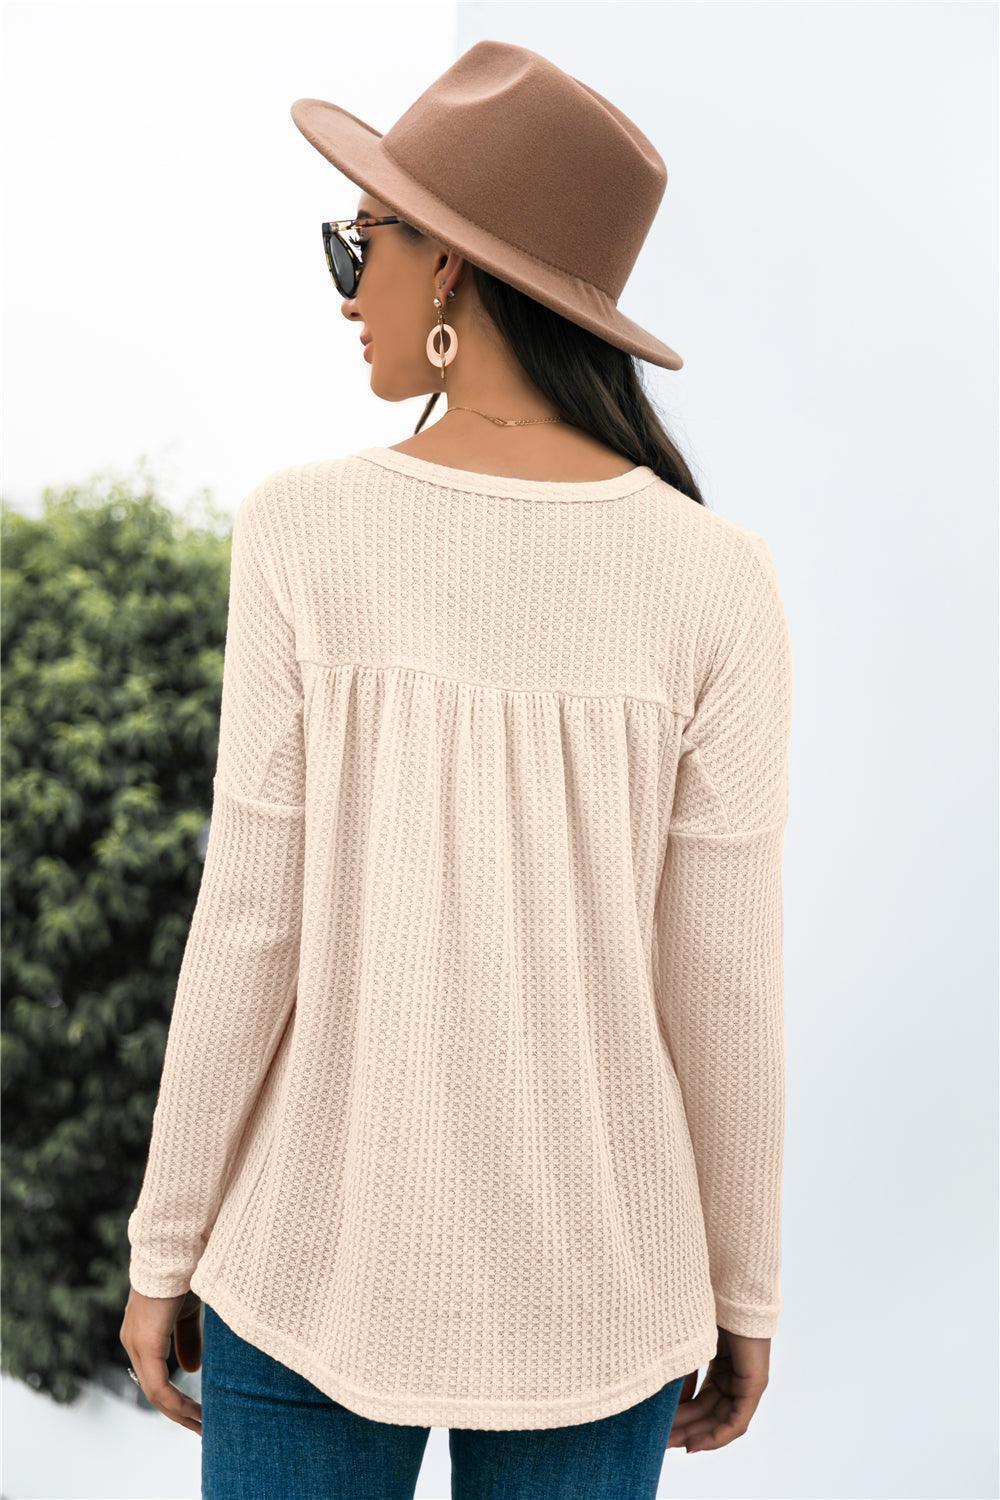 Out of the Ordinary Knit Babydoll Long Sleeve Top - MXSTUDIO.COM